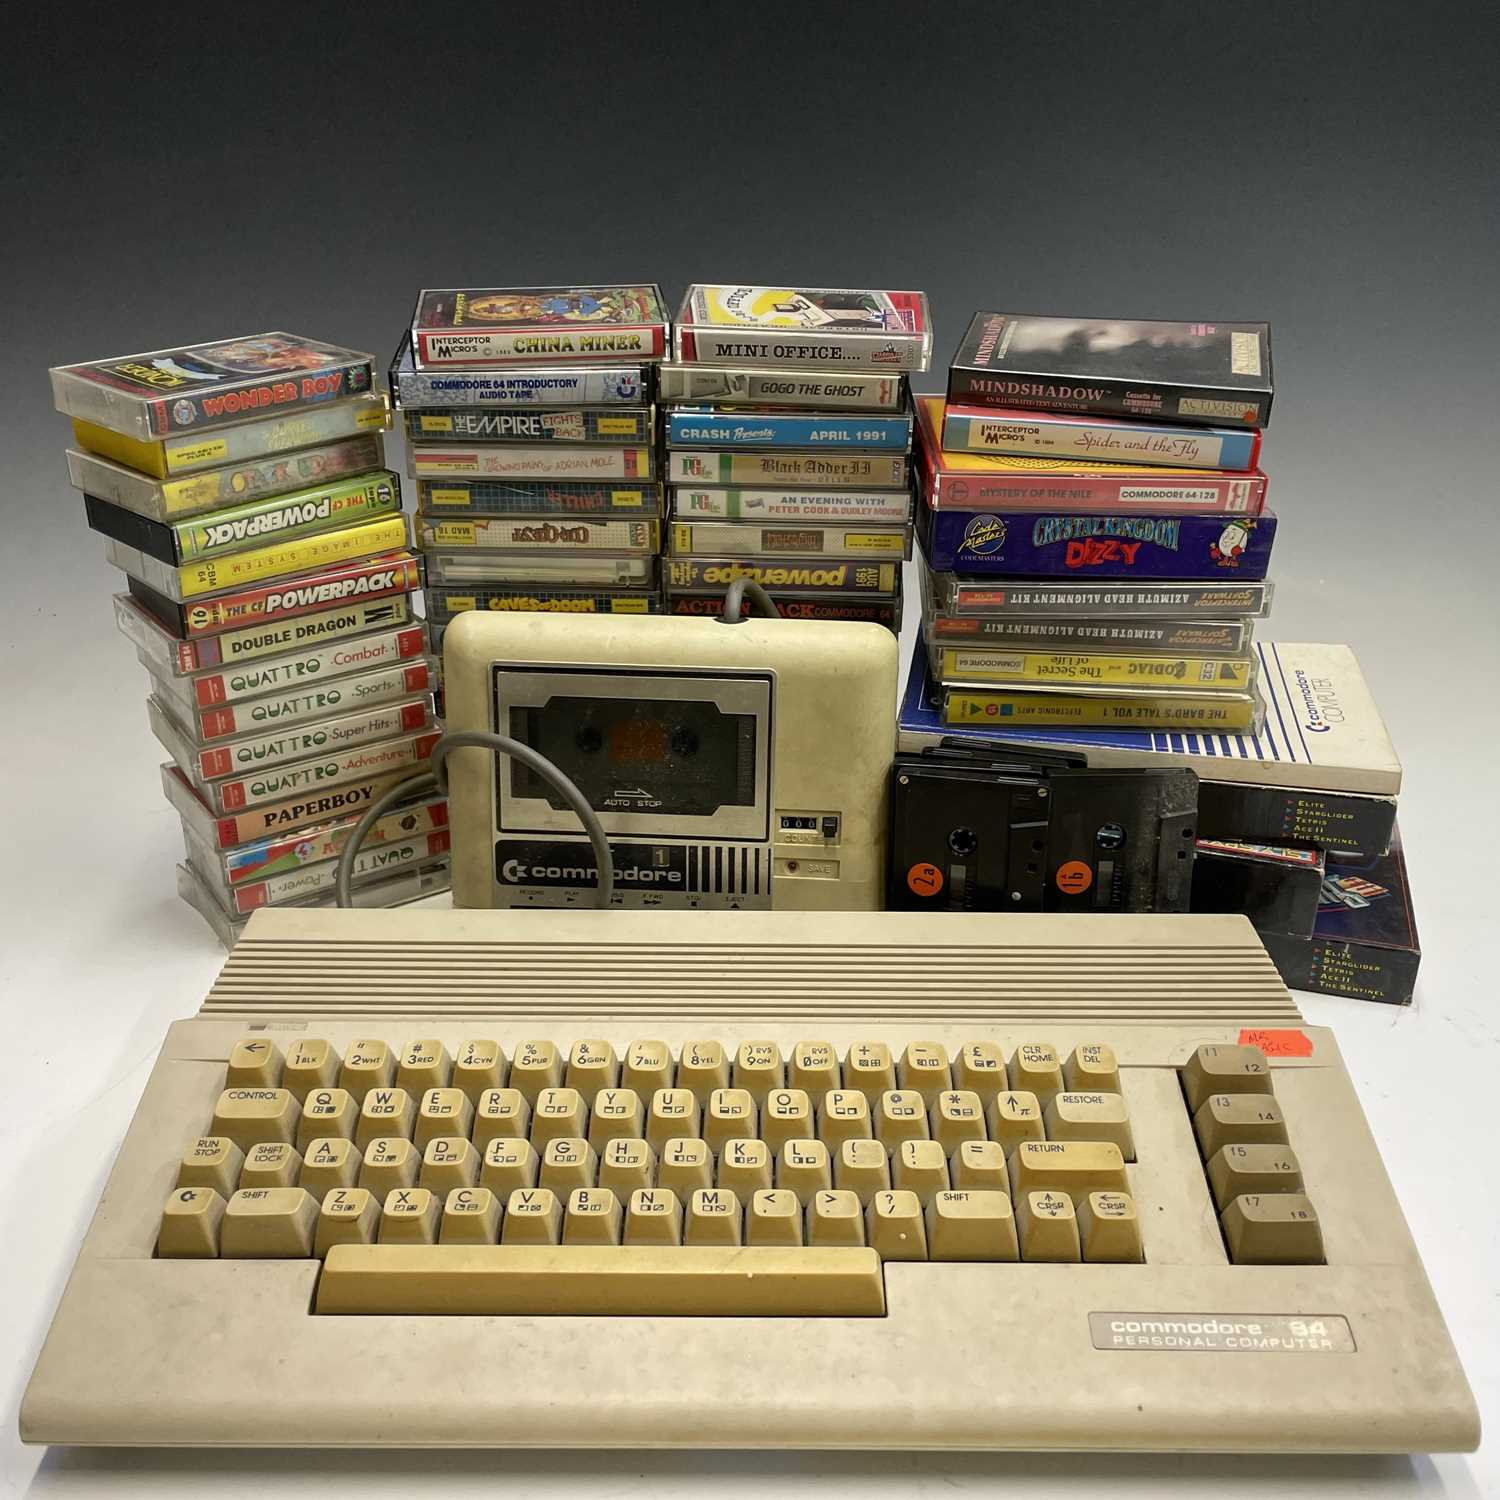 Lot 350 - A Commodore 64 with an original cassette